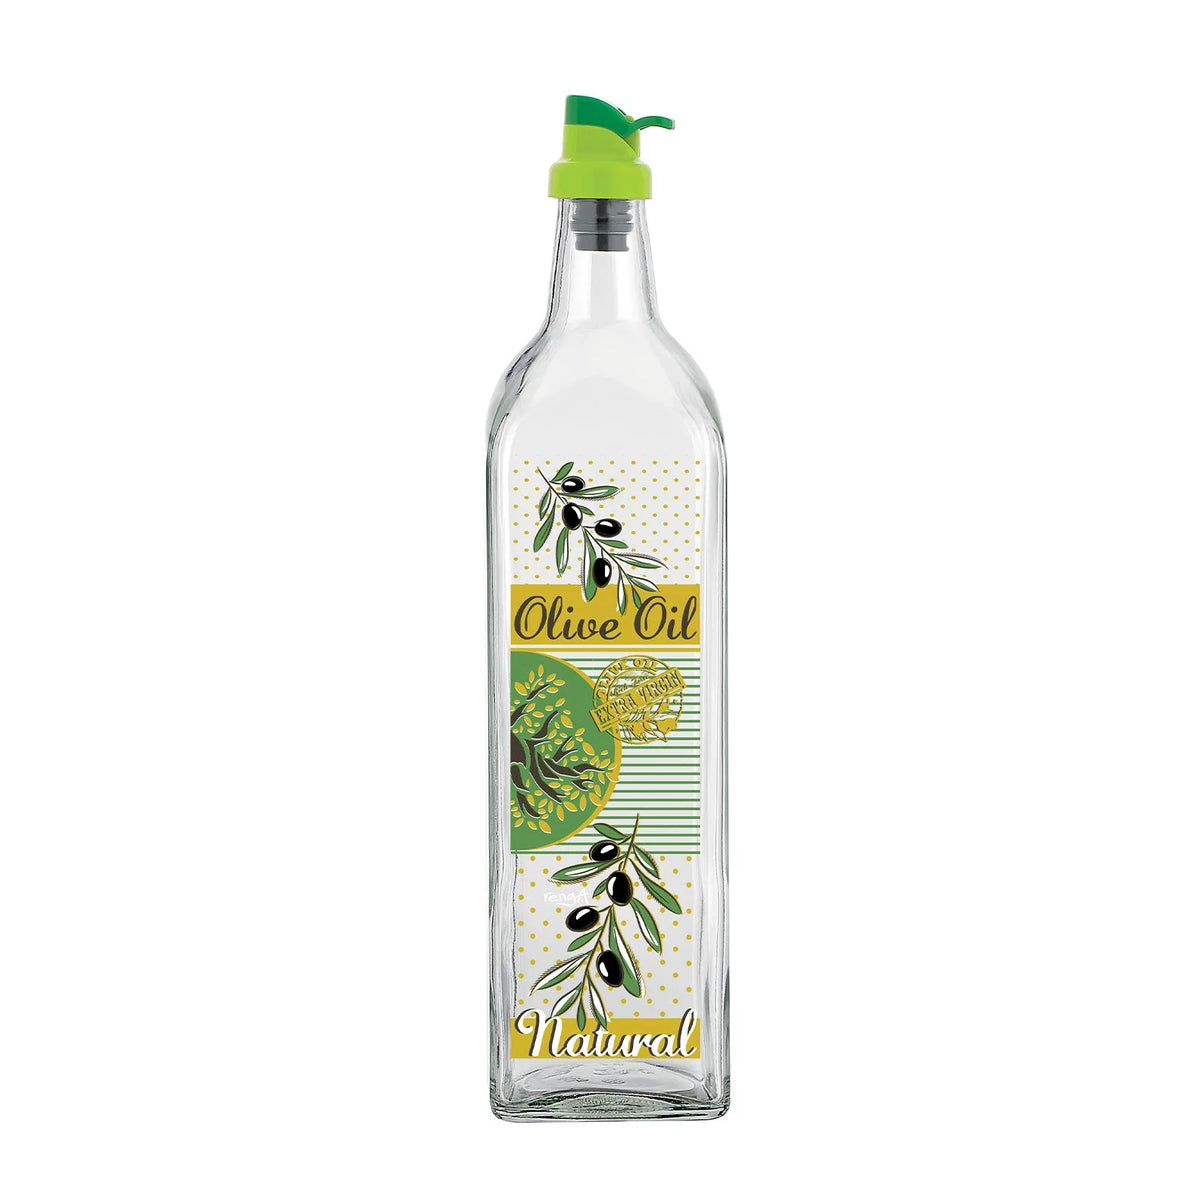 Glass bottle decorated with oil dispenser - 500ml